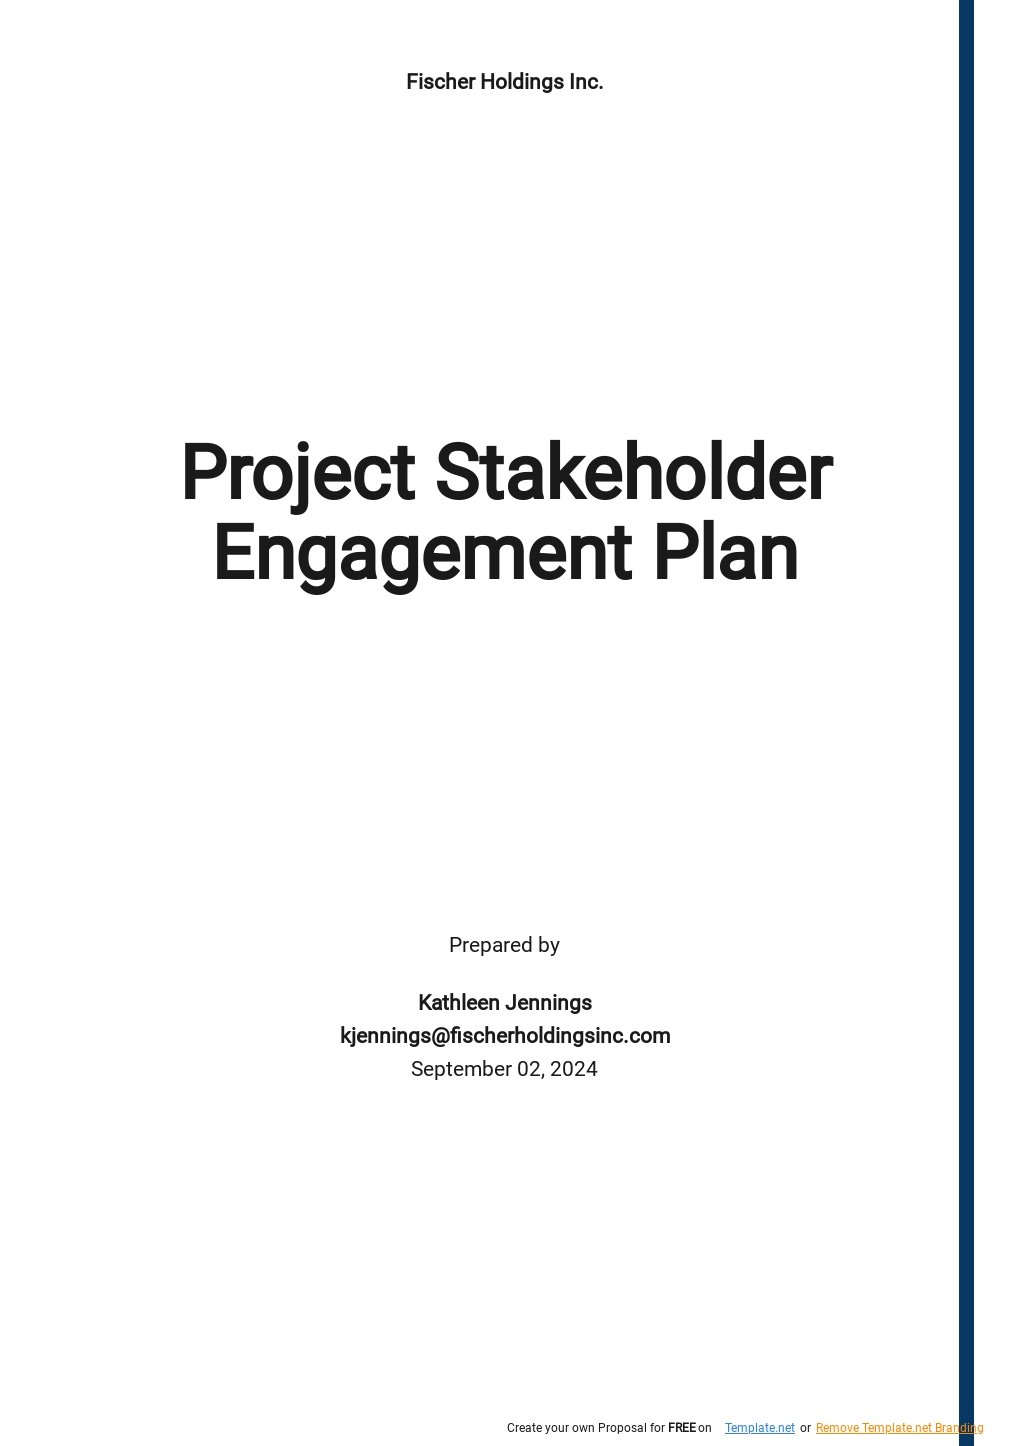 Project Stakeholder Engagement Plan Template